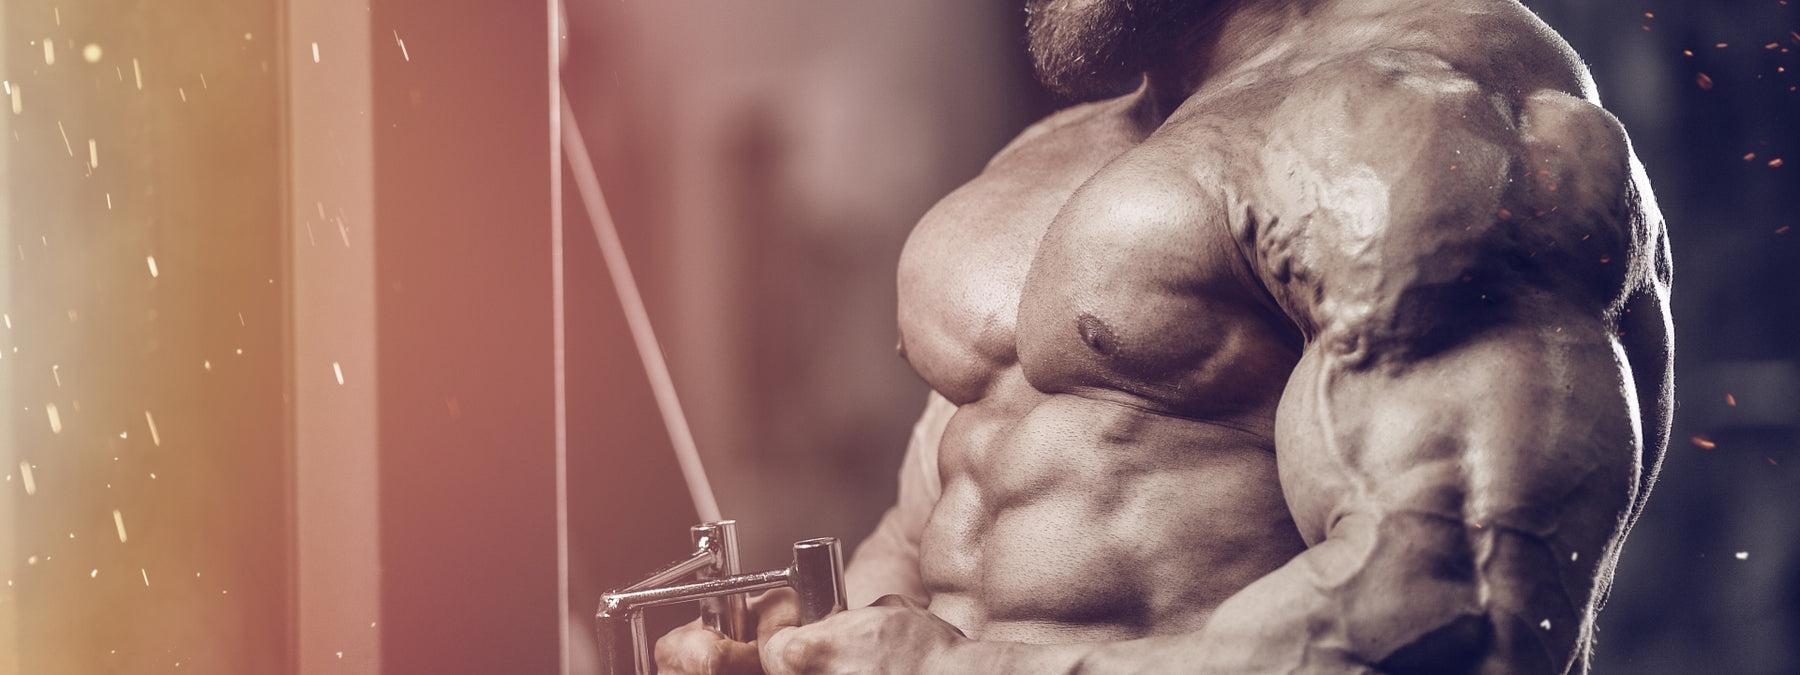 Build More Mass and Strength With Negatives